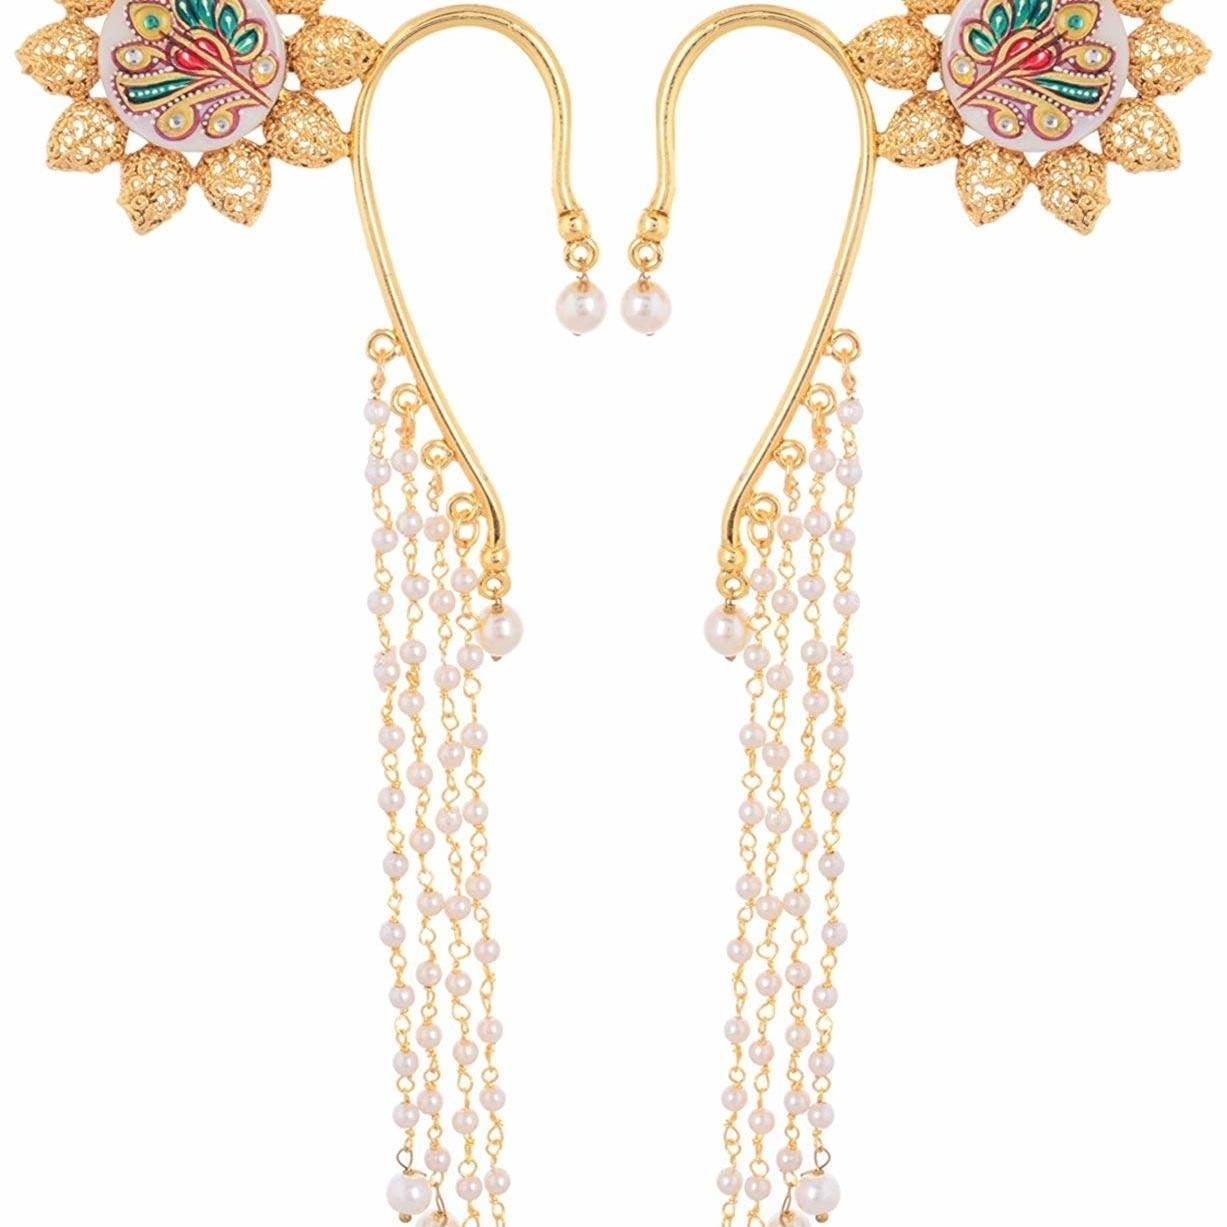 Ashiana Gold Flower with Marble Inlay work and Pearl Tassel Ear Cuff Earring